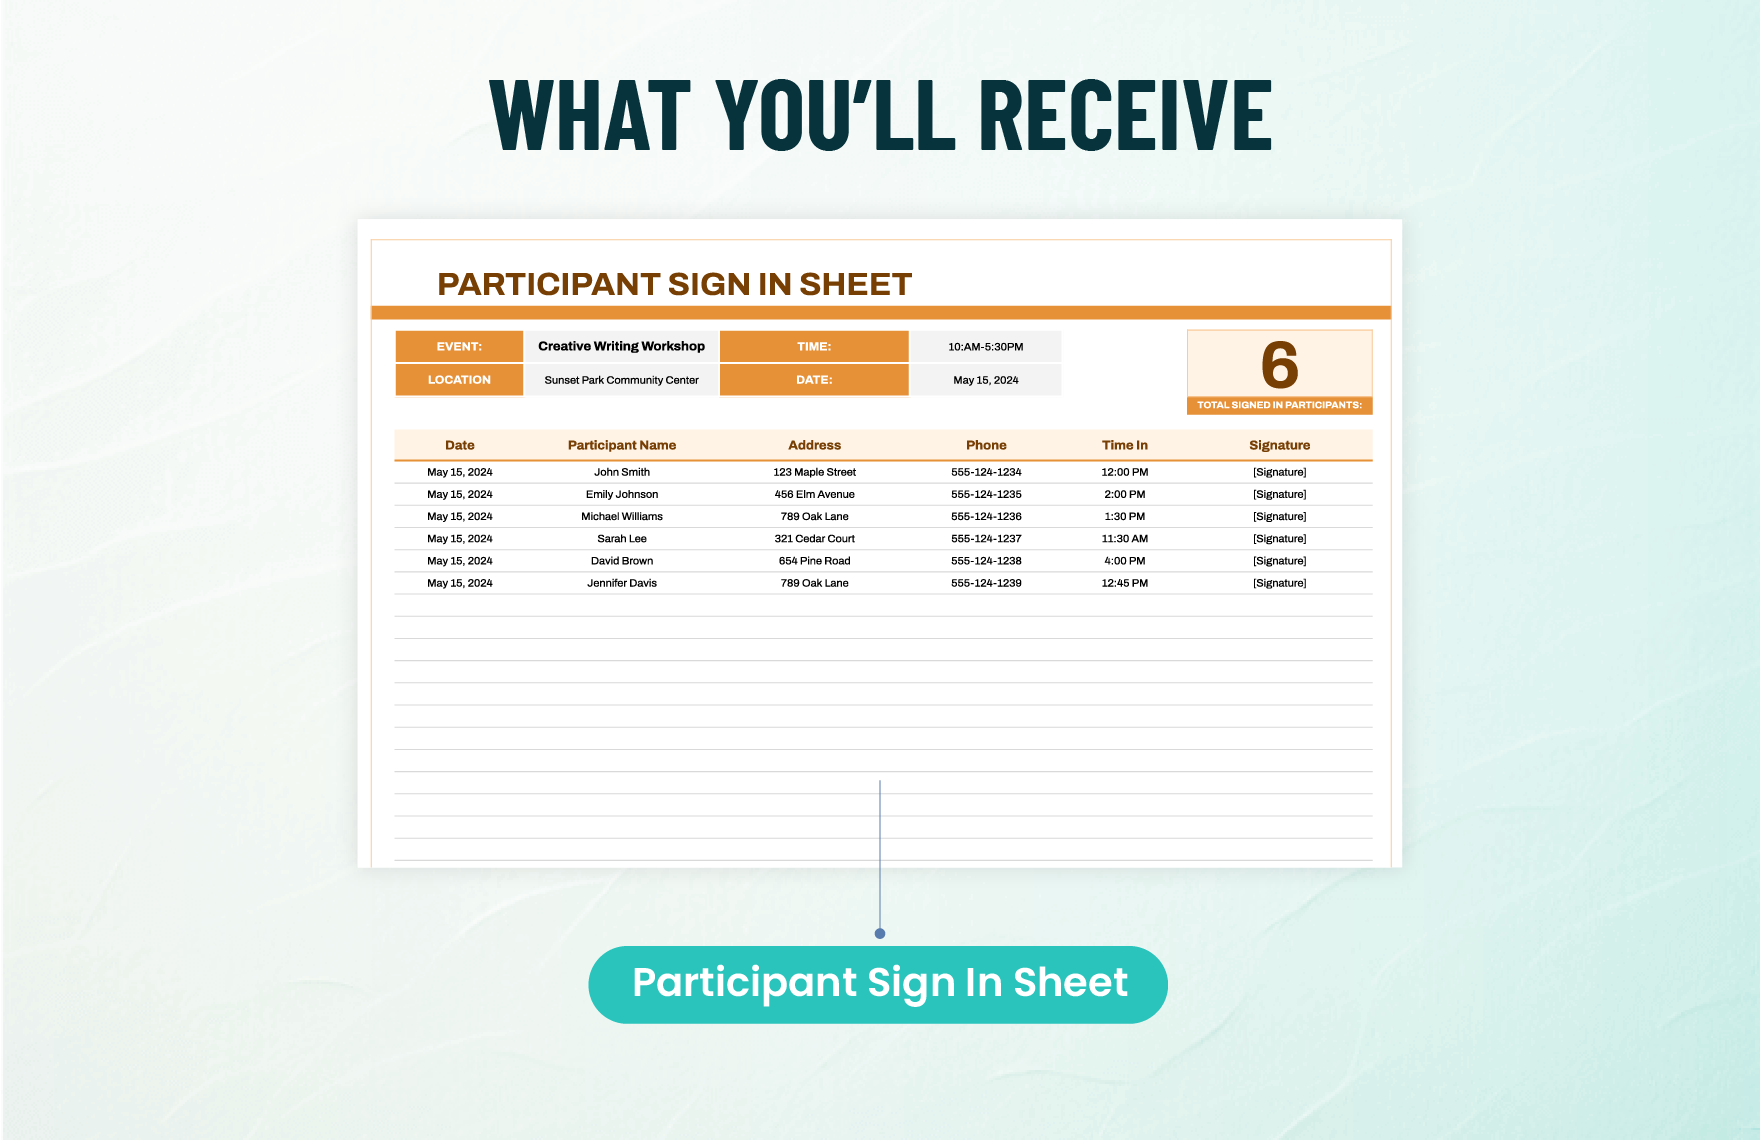 Participant Sign Out Sheet Template